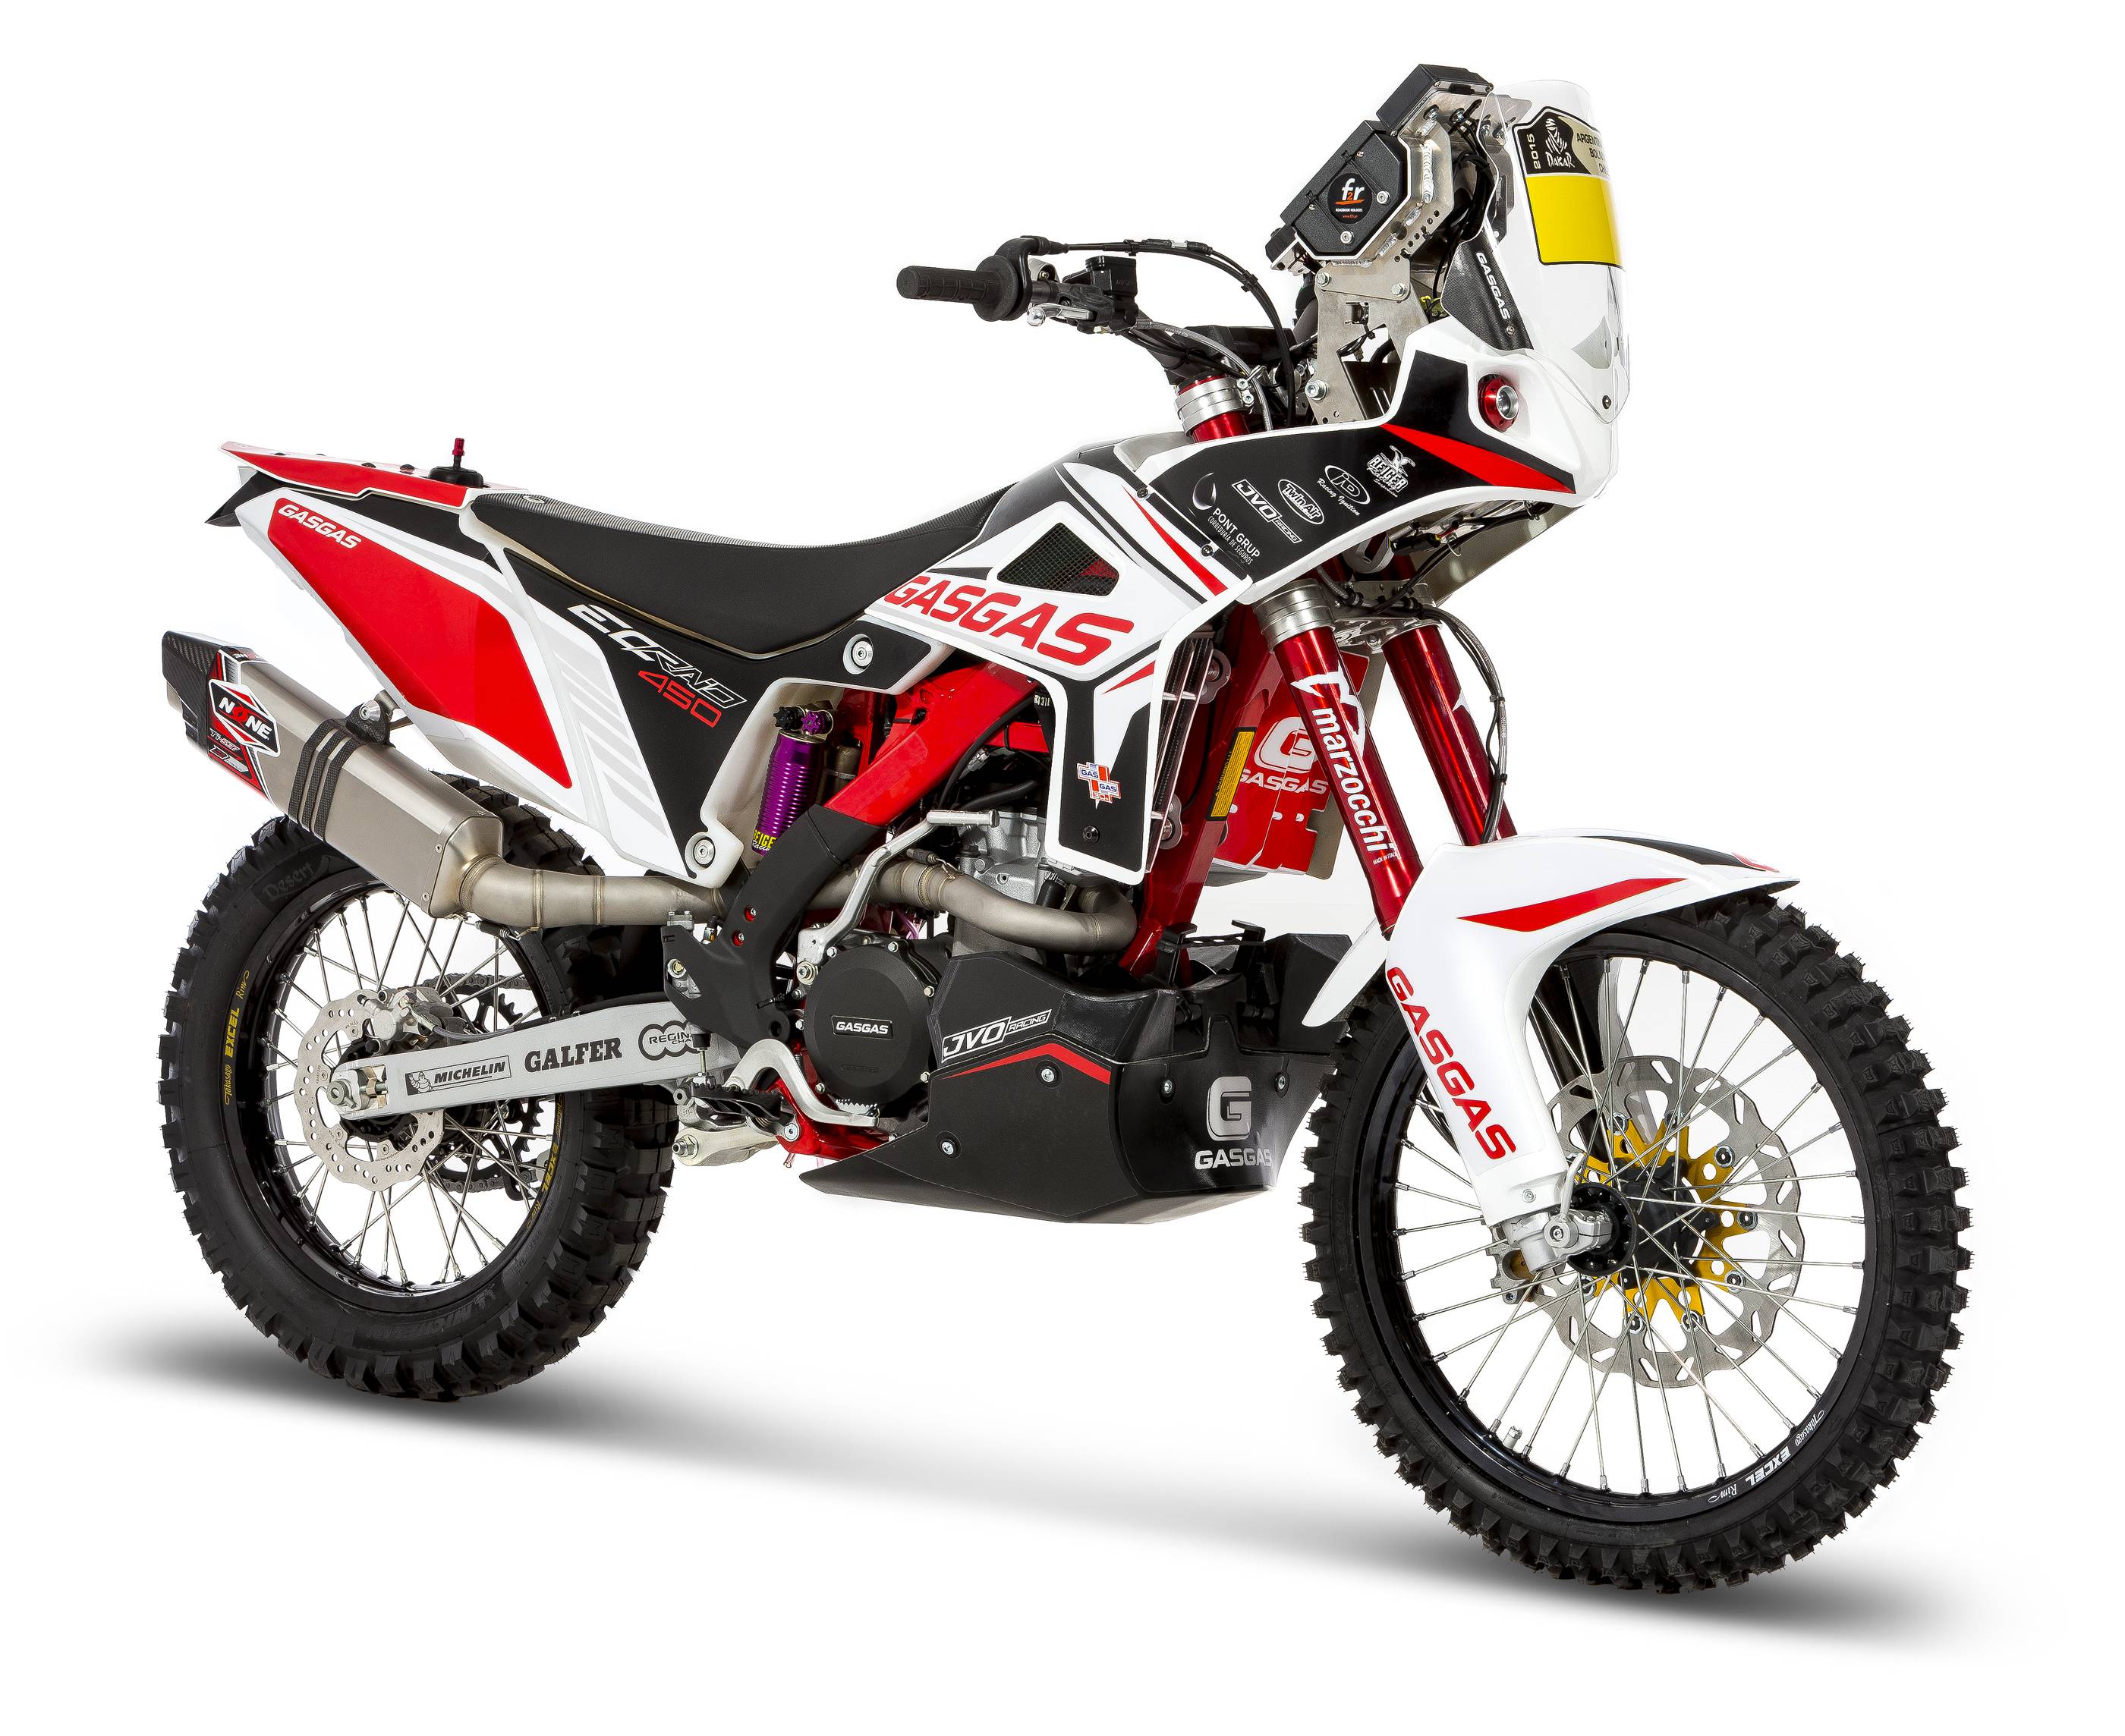 DIrt Bike Magazine. TWO BROTHERS RACING LAUNCHES POWER PLUS KIT